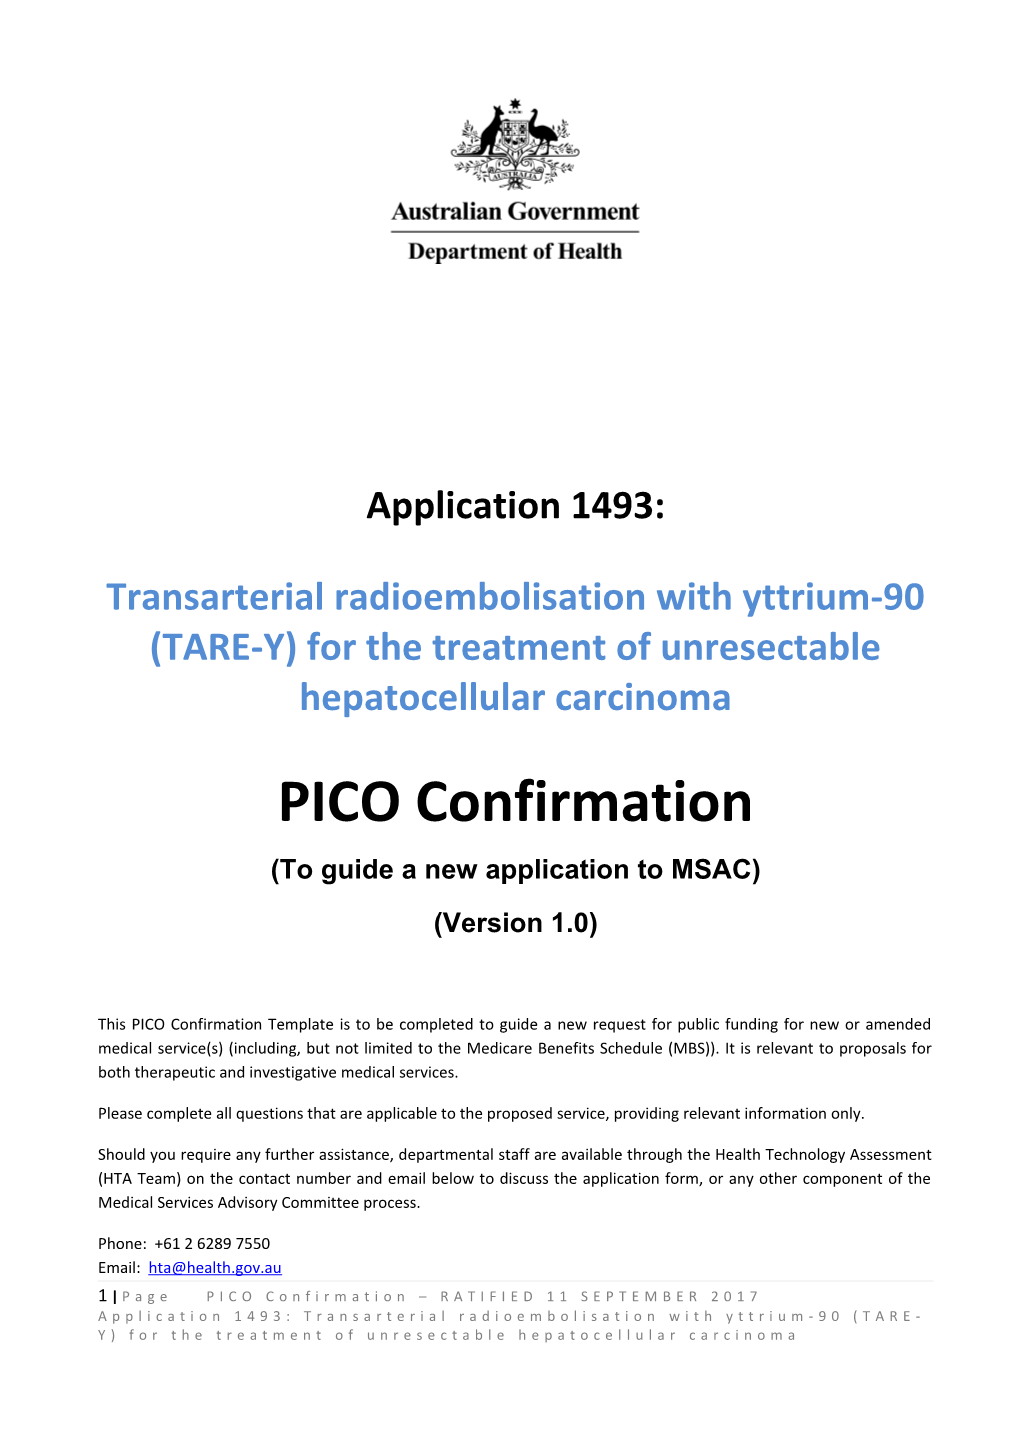 Transarterial Radioembolisation with Yttrium-90 (TARE-Y) for the Treatment of Unresectable